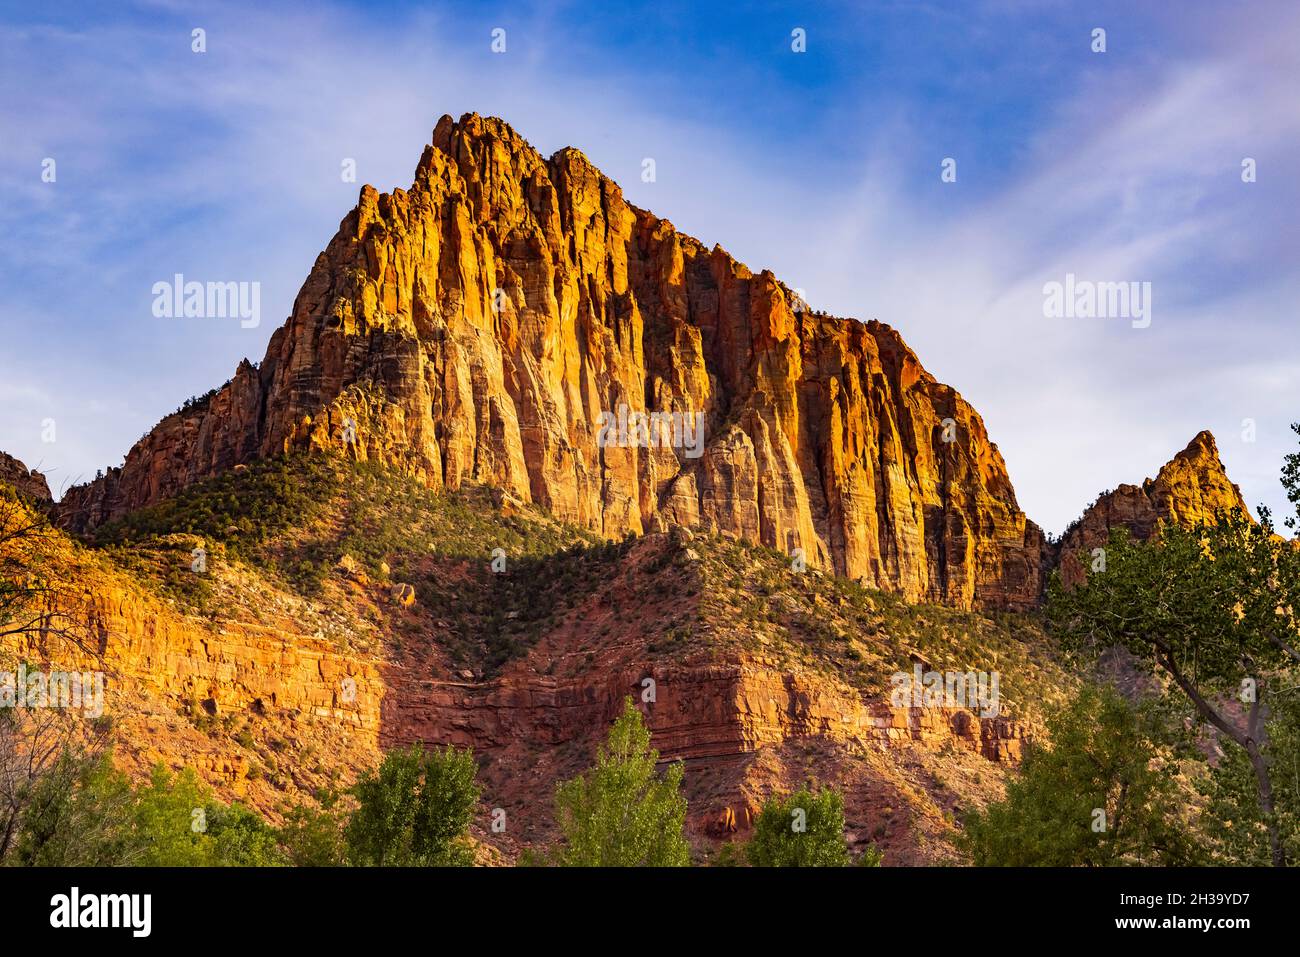 The golden light of the setting sun lights up The Watchman, a majestic rock formation in Zion National Park, Springdale, Washington County, Utah, USA. Stock Photo